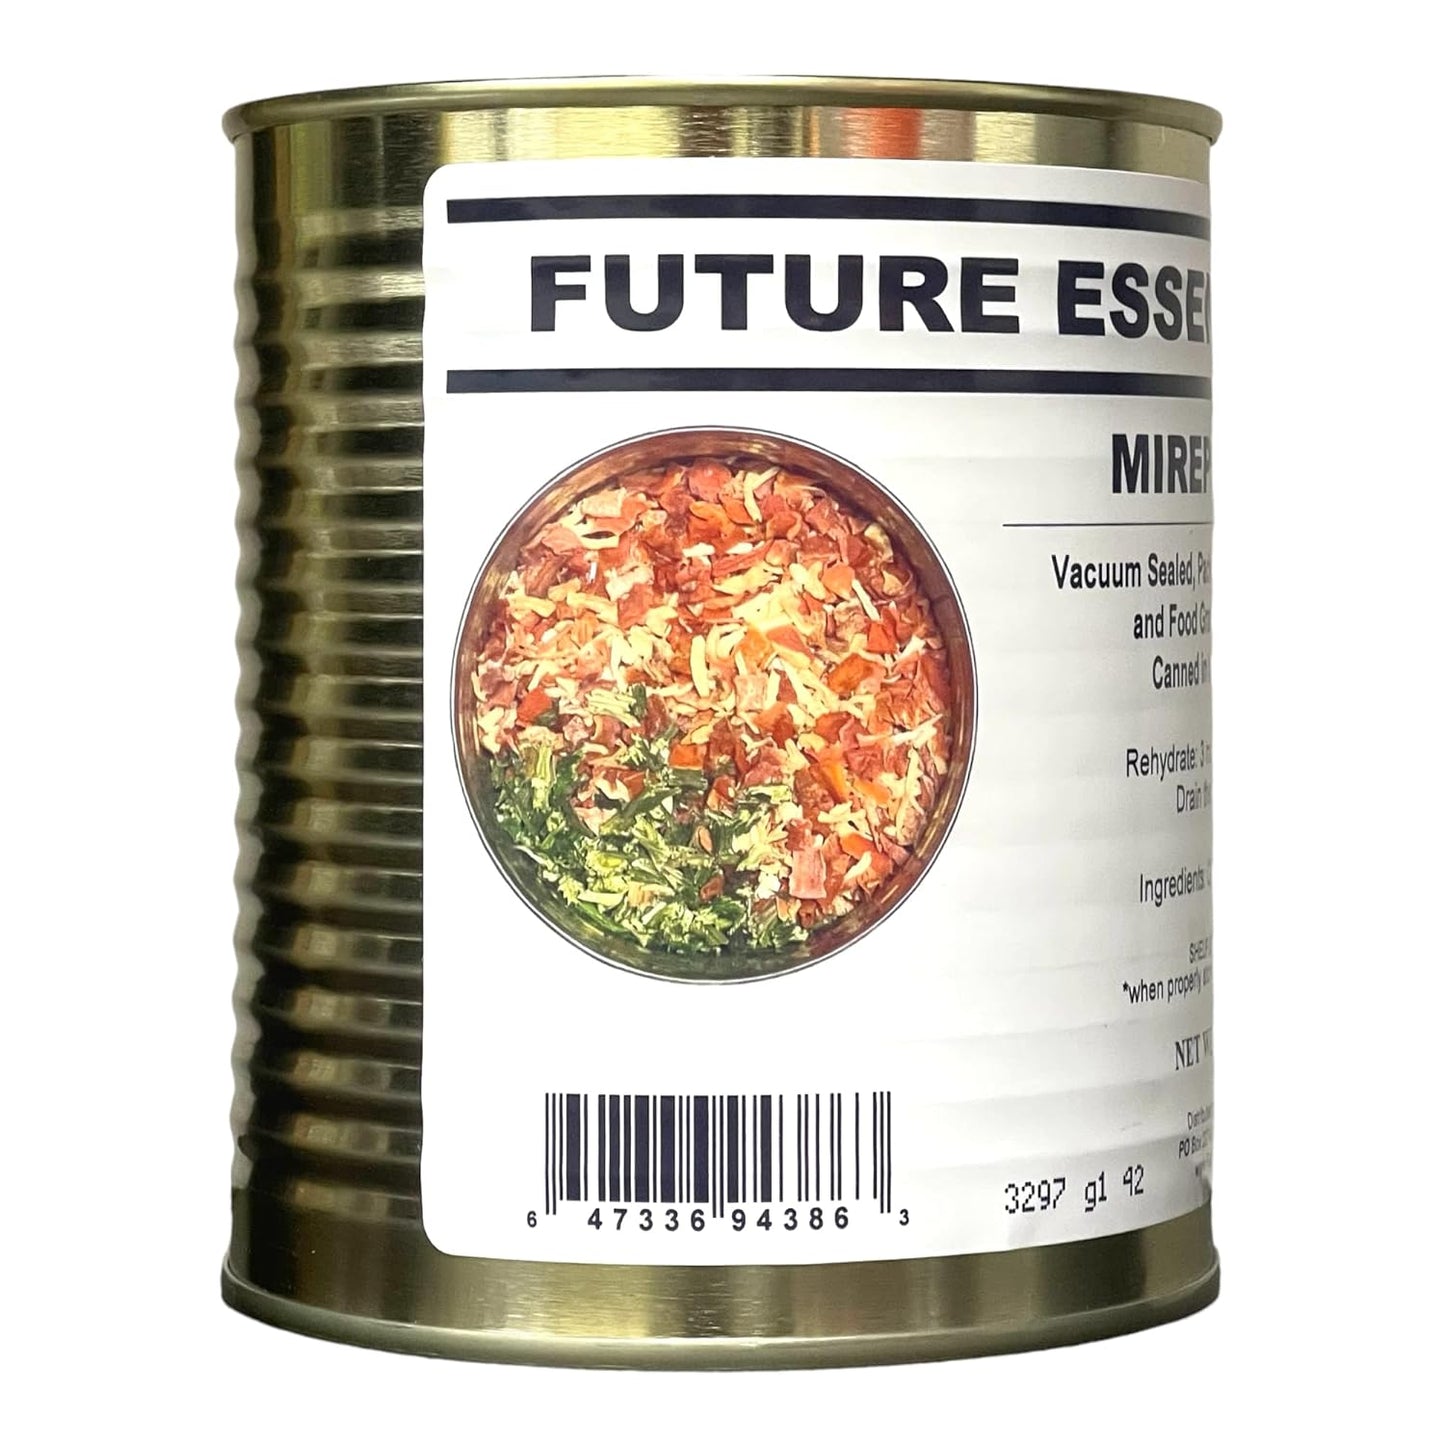 Future Essentials Canned Dehydrated Mirepoix Mix (Net Weight 7.5 Oz)